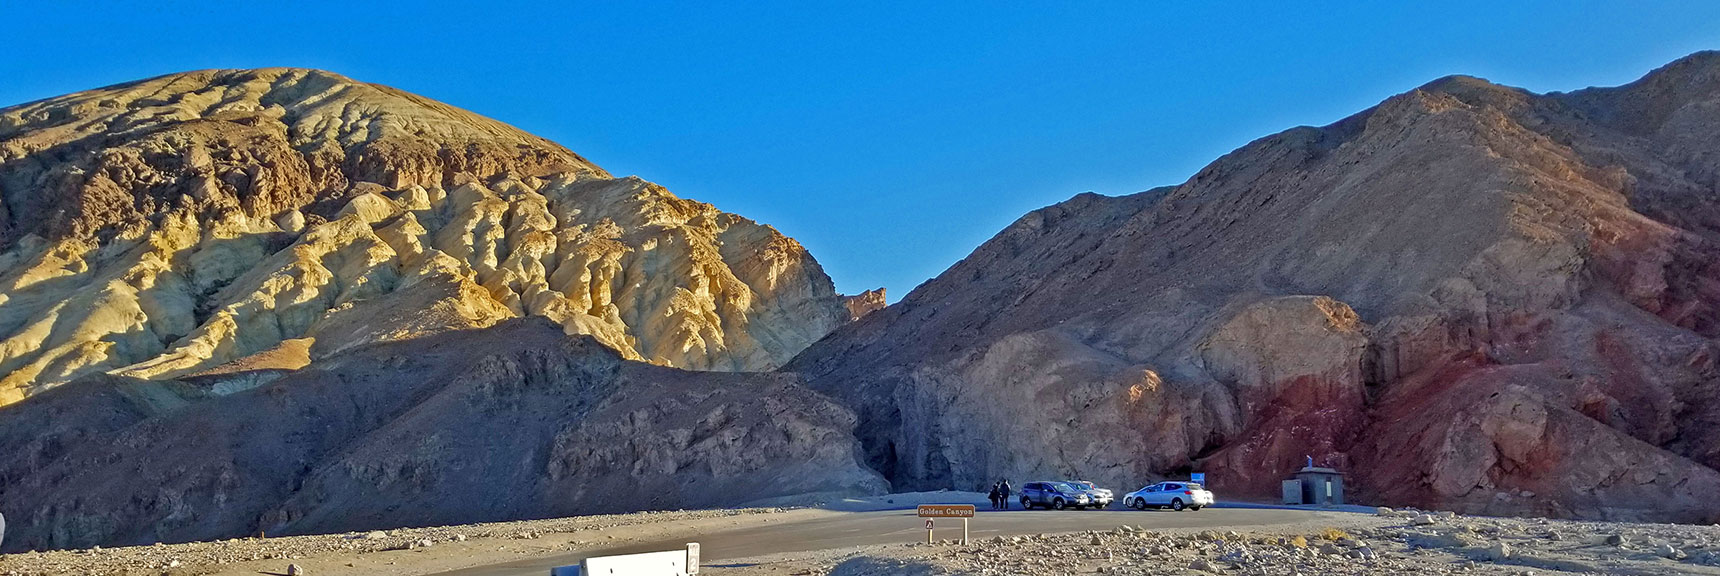 Adventure Begins Early Morning at the Entrance to Golden Canyon | Golden Canyon to Zabriskie Point | Death Valley National Park, California